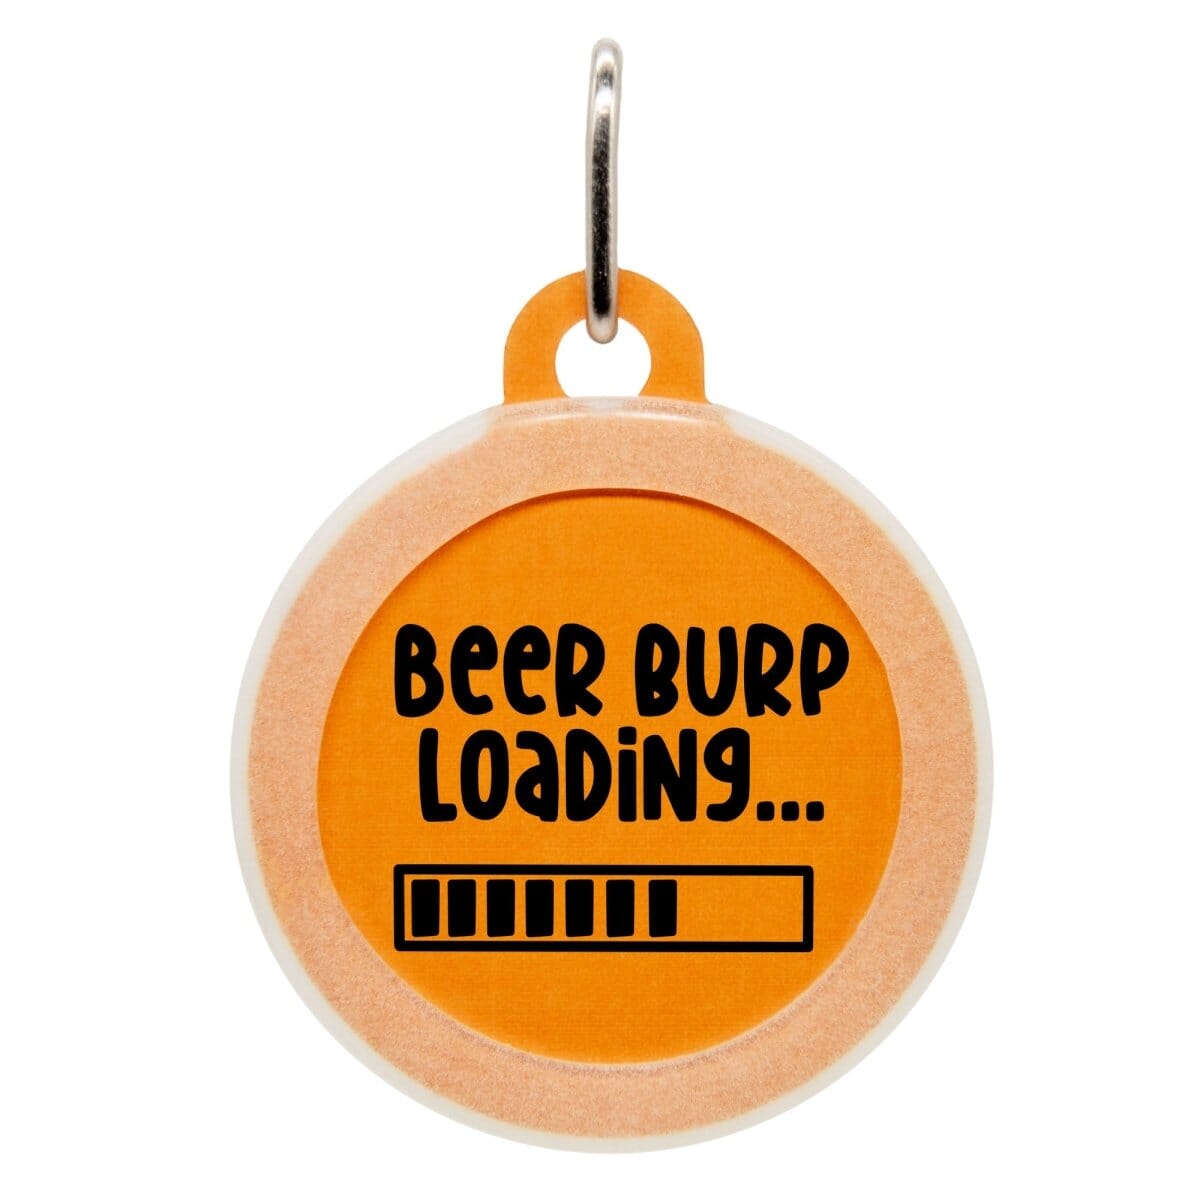 Beer Burp Loading Name Tag - Oh My Paw'd